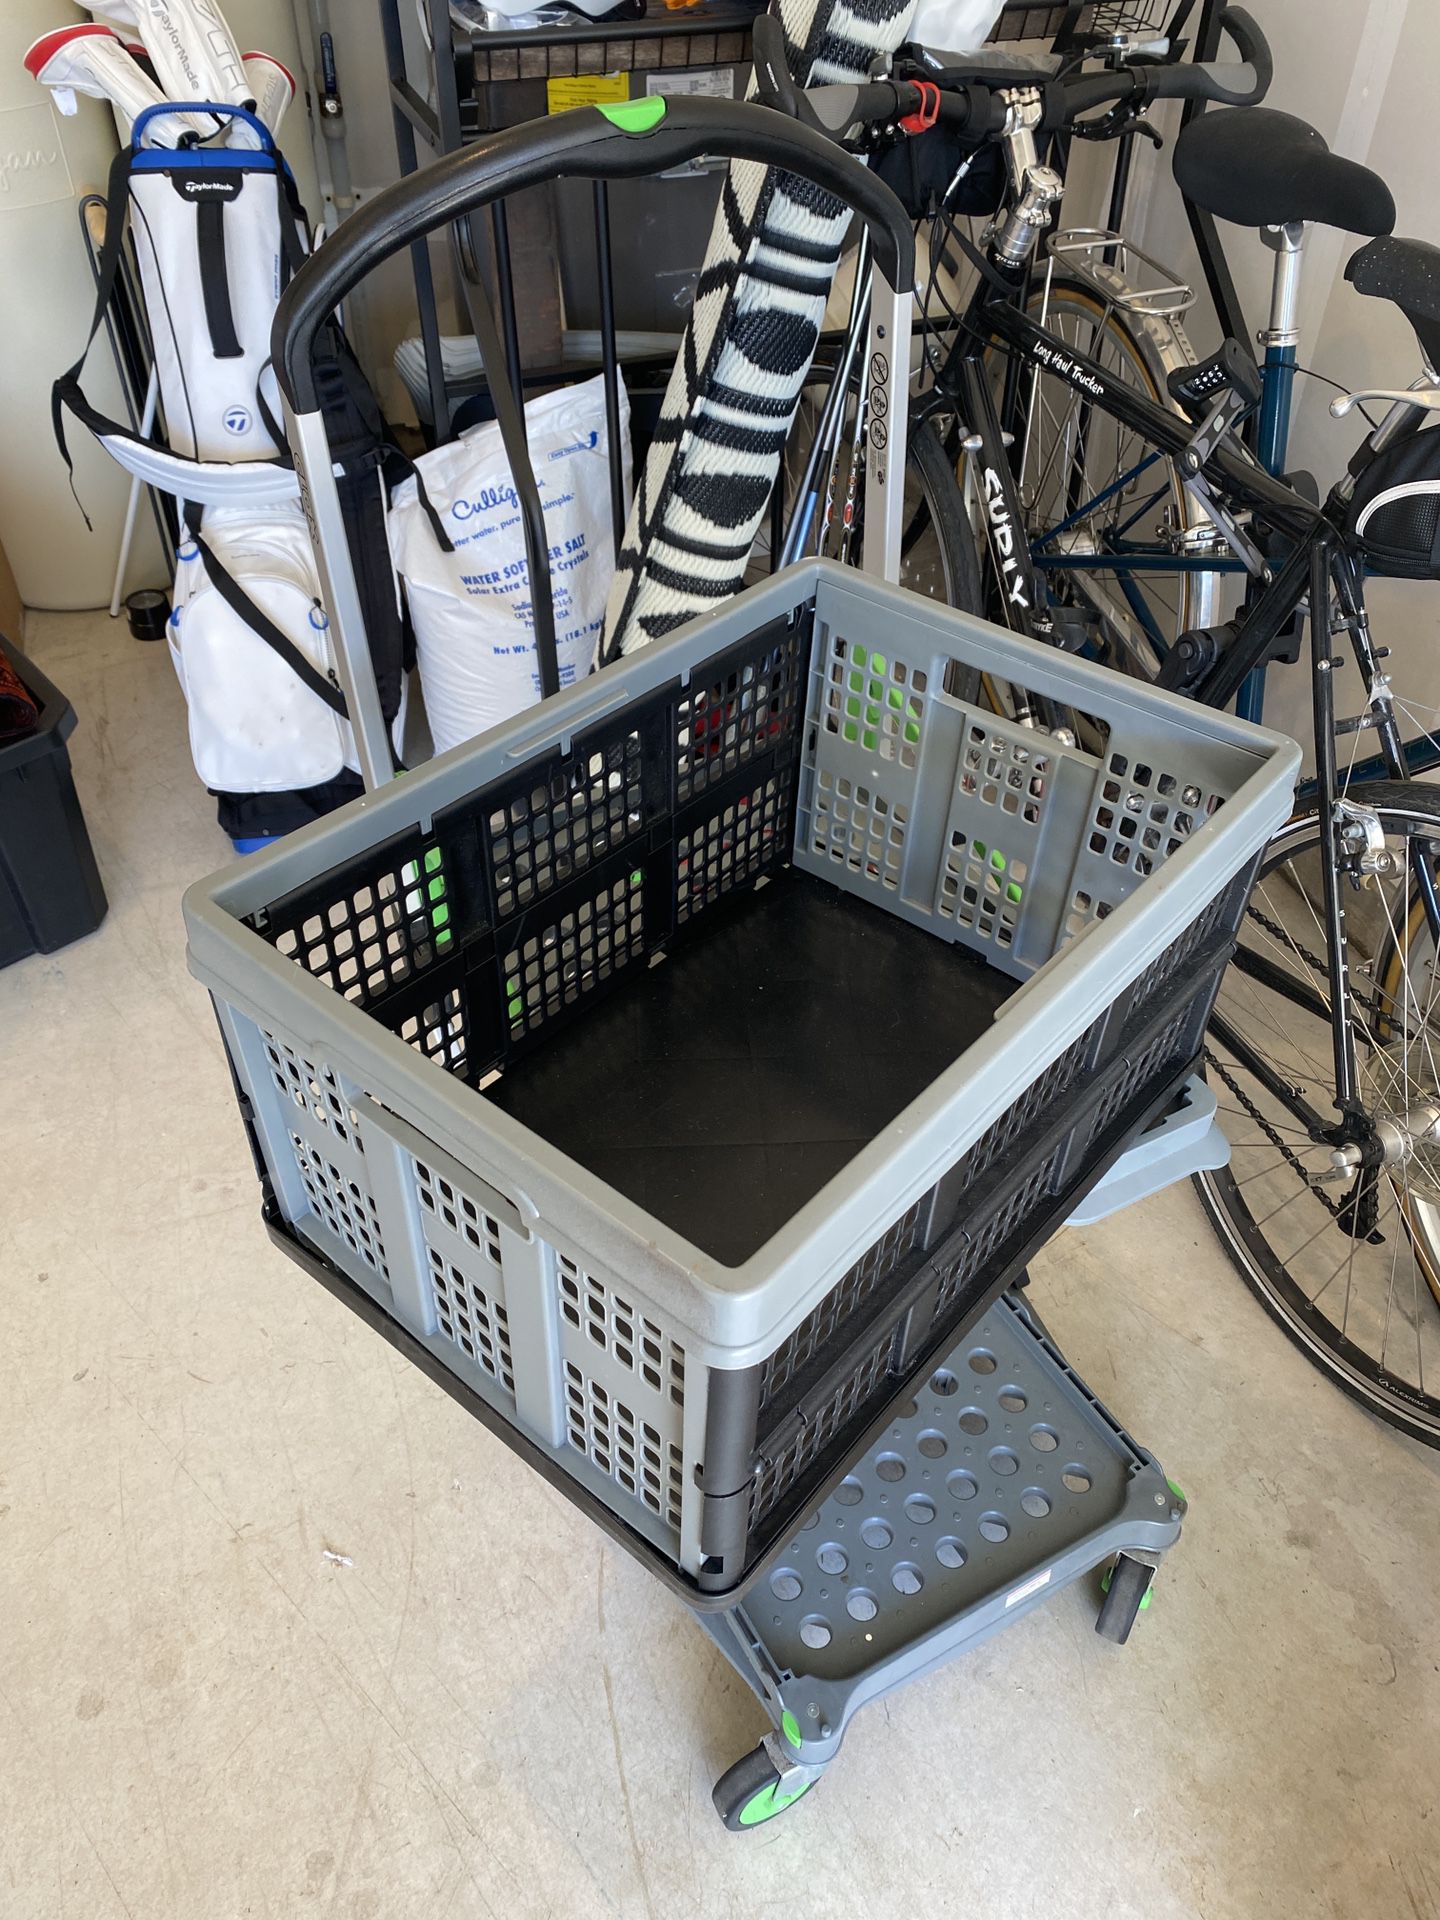 CLAX Cart for Sale in Vancouver, WA - OfferUp